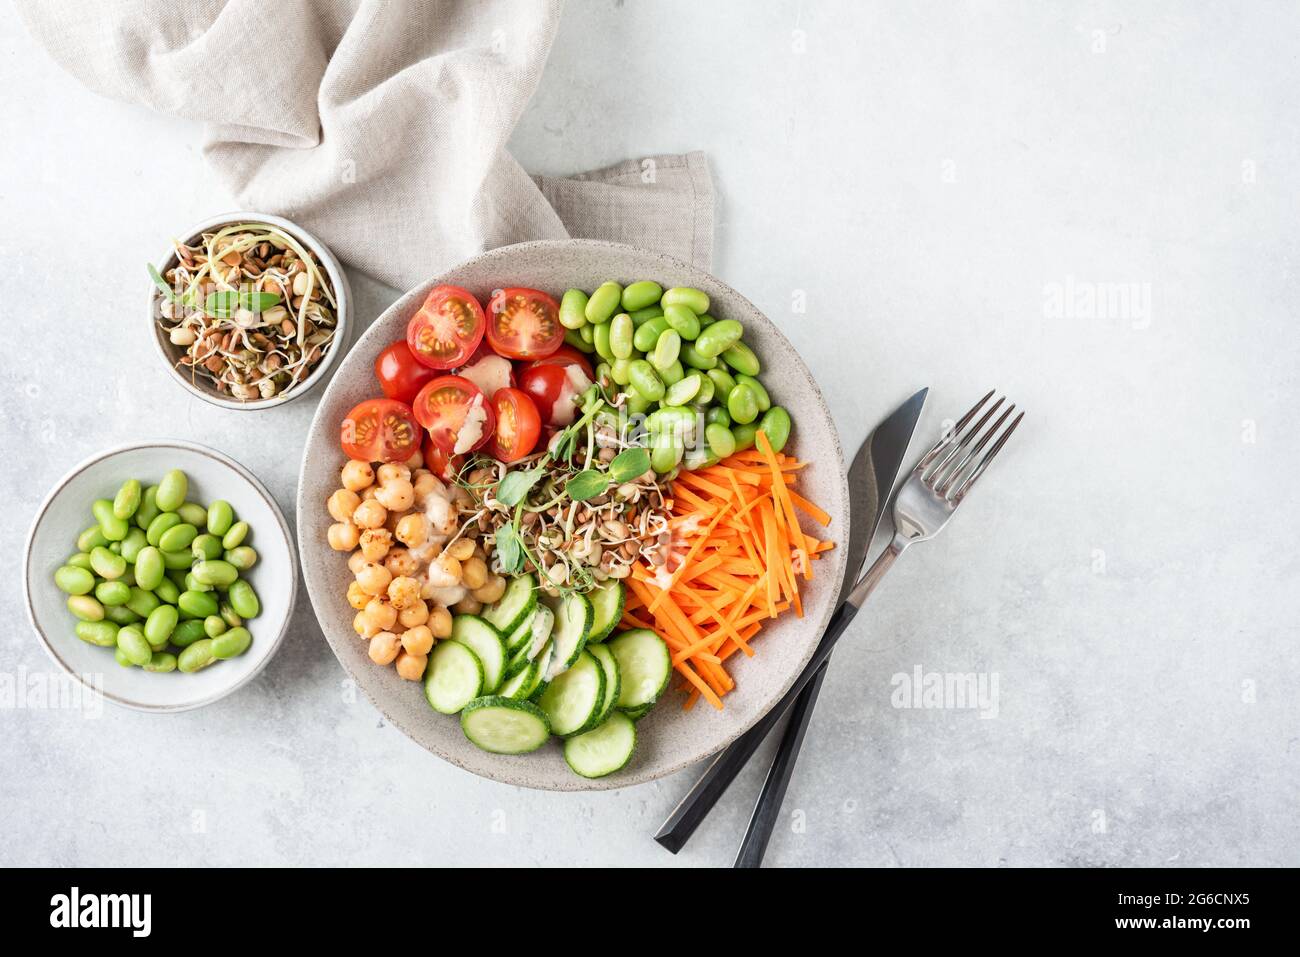 Vegan Salad Bowl With Chickpeas, Vegetables, Sprouts. Buddha Bowl On grey Concrete Background, Top view, Copy Space Stock Photo